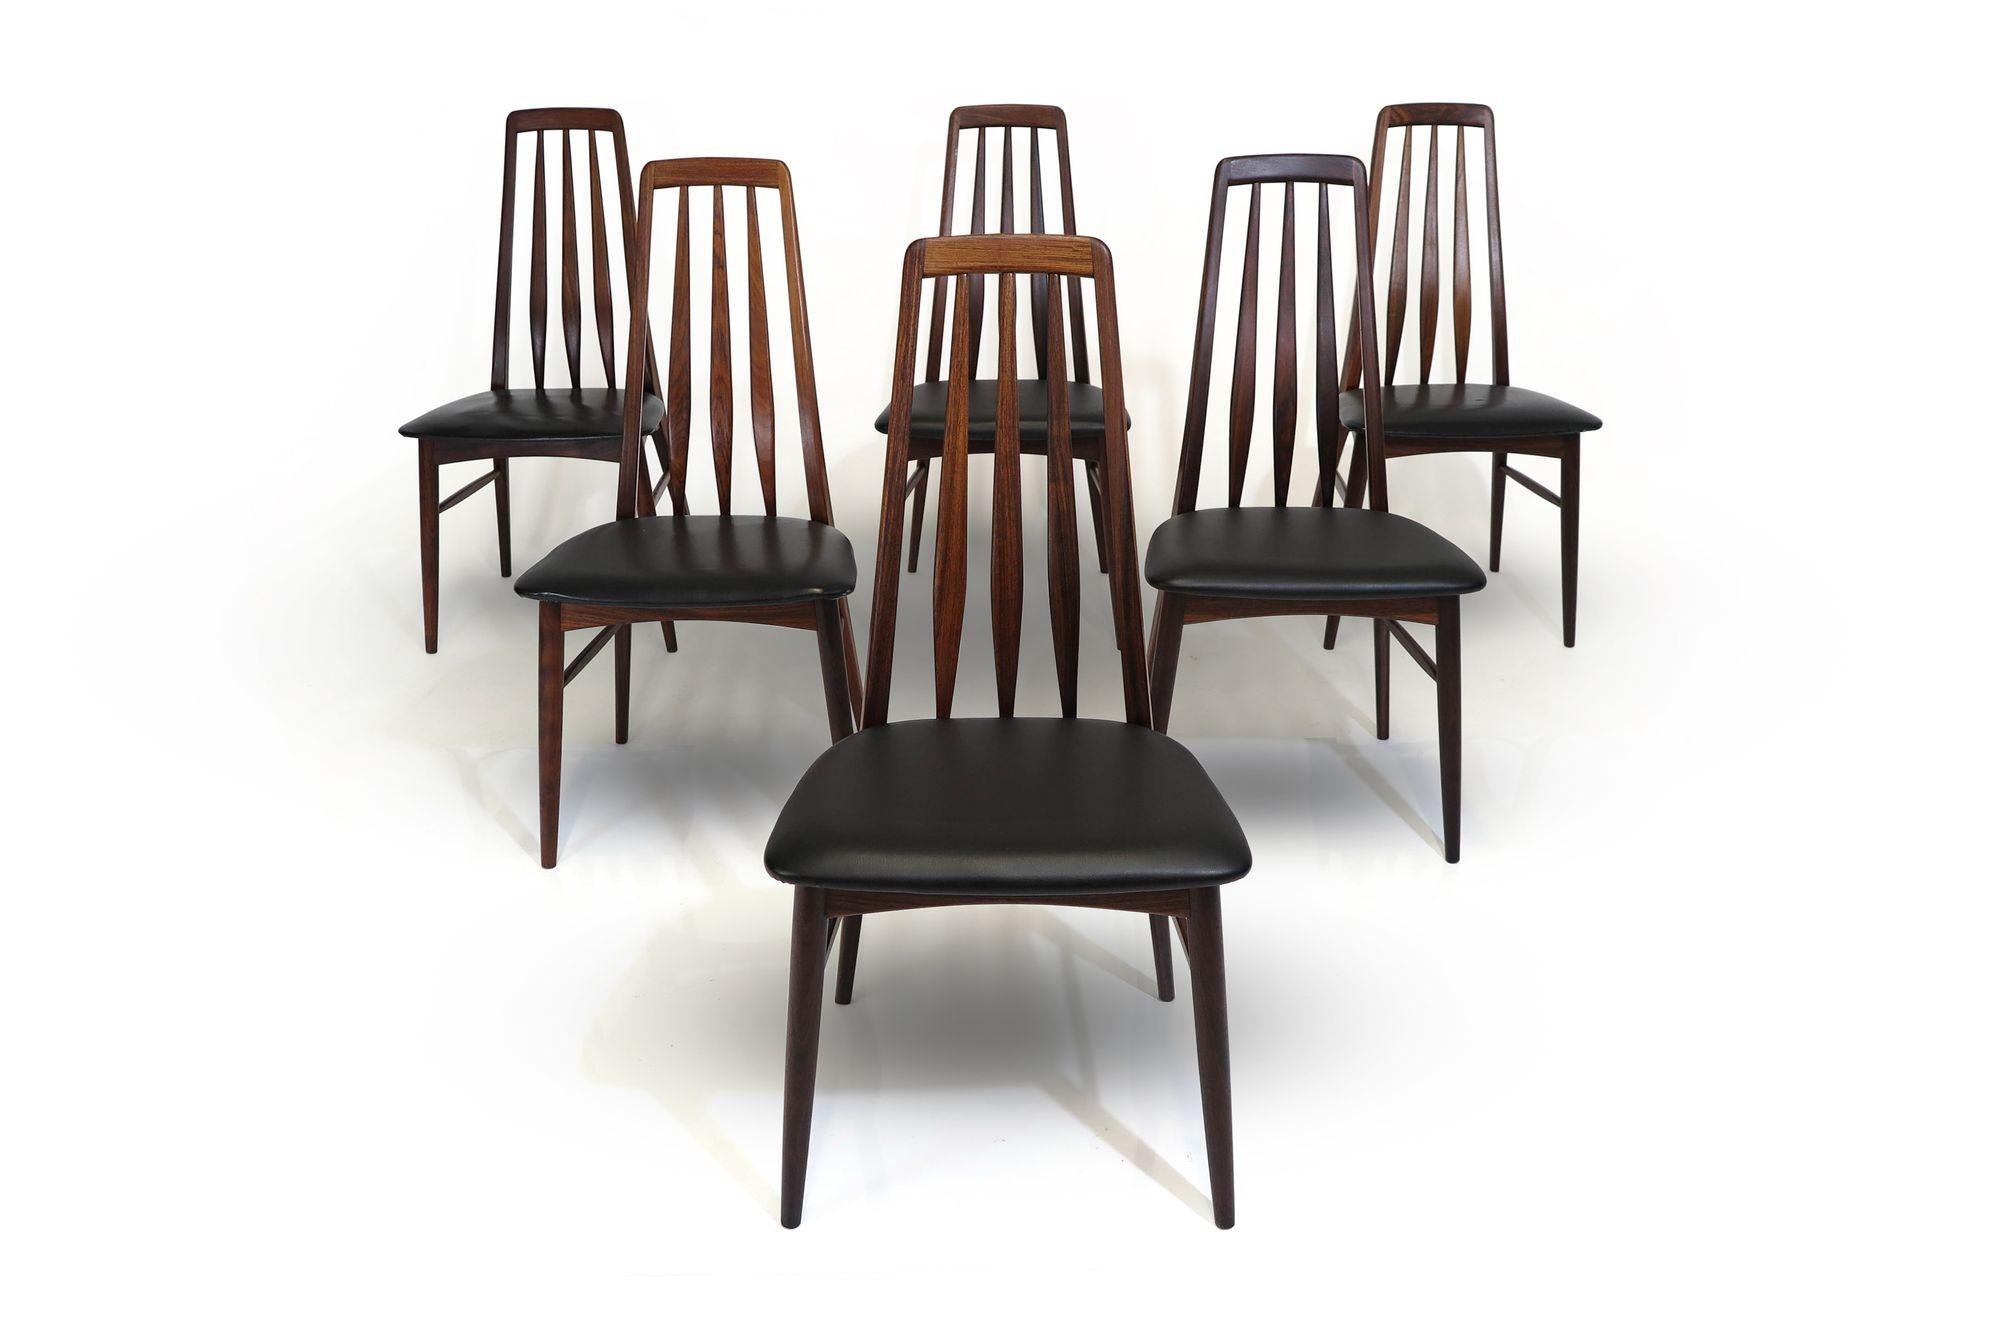 Six rosewood dining chairs designed by Niels Koefoed for Koefoeds Hornslet, 1962 Denmark. The chair frames are crafted of solid rosewood with angled, slatted back rests, which offers comfortable lumbar support. The upholstered seats are in the